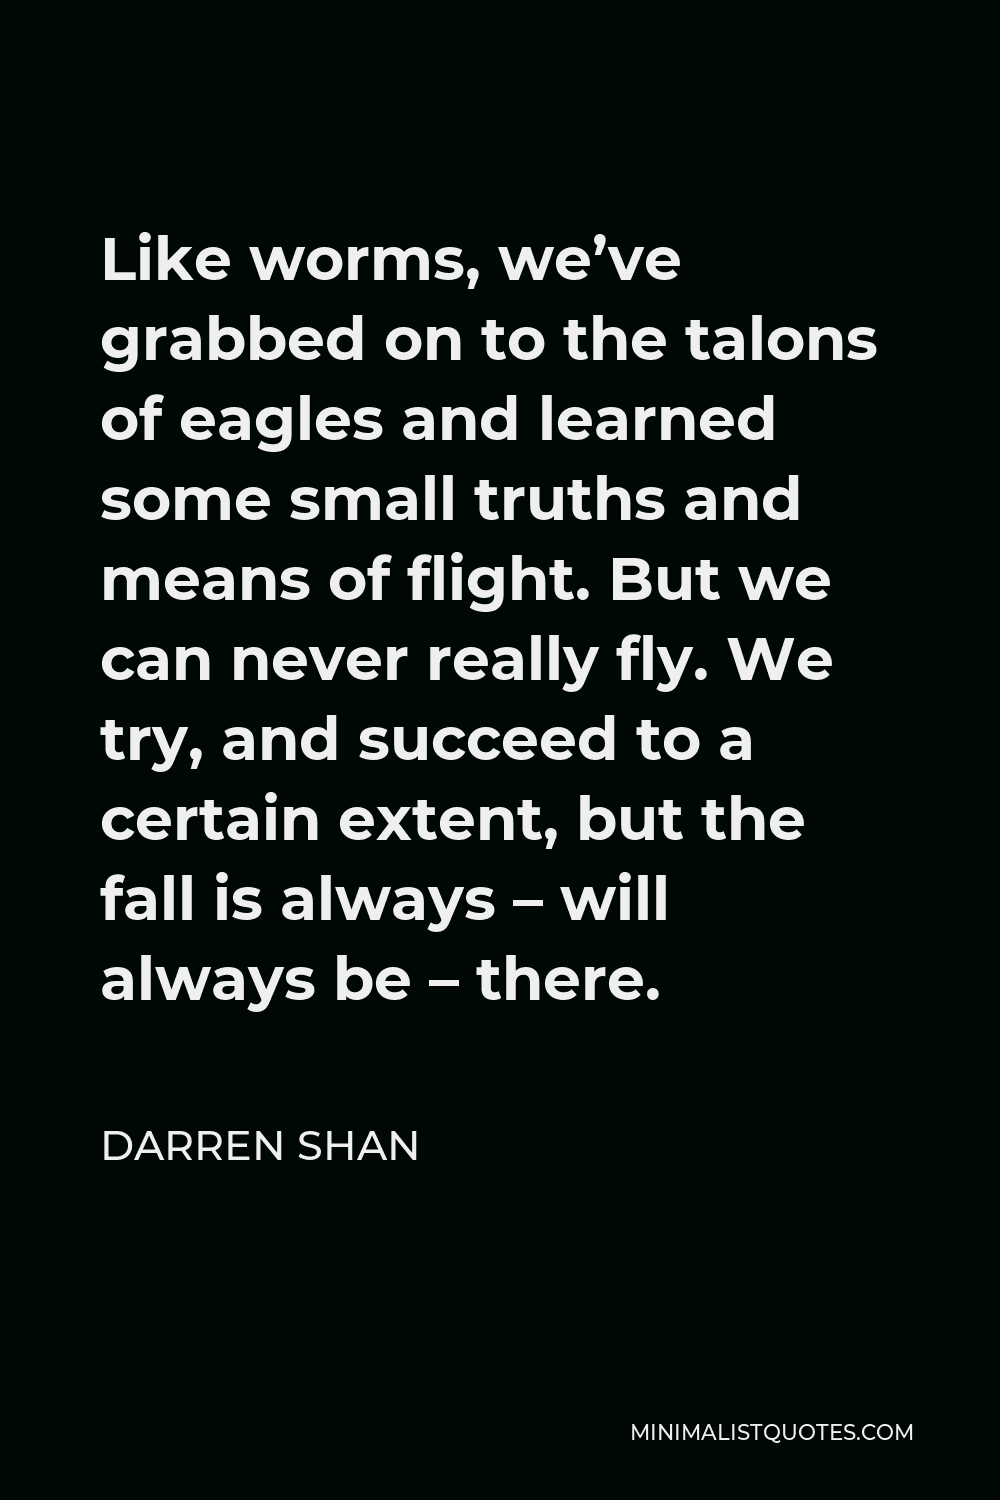 Darren Shan Quote - Like worms, we’ve grabbed on to the talons of eagles and learned some small truths and means of flight. But we can never really fly. We try, and succeed to a certain extent, but the fall is always – will always be – there.